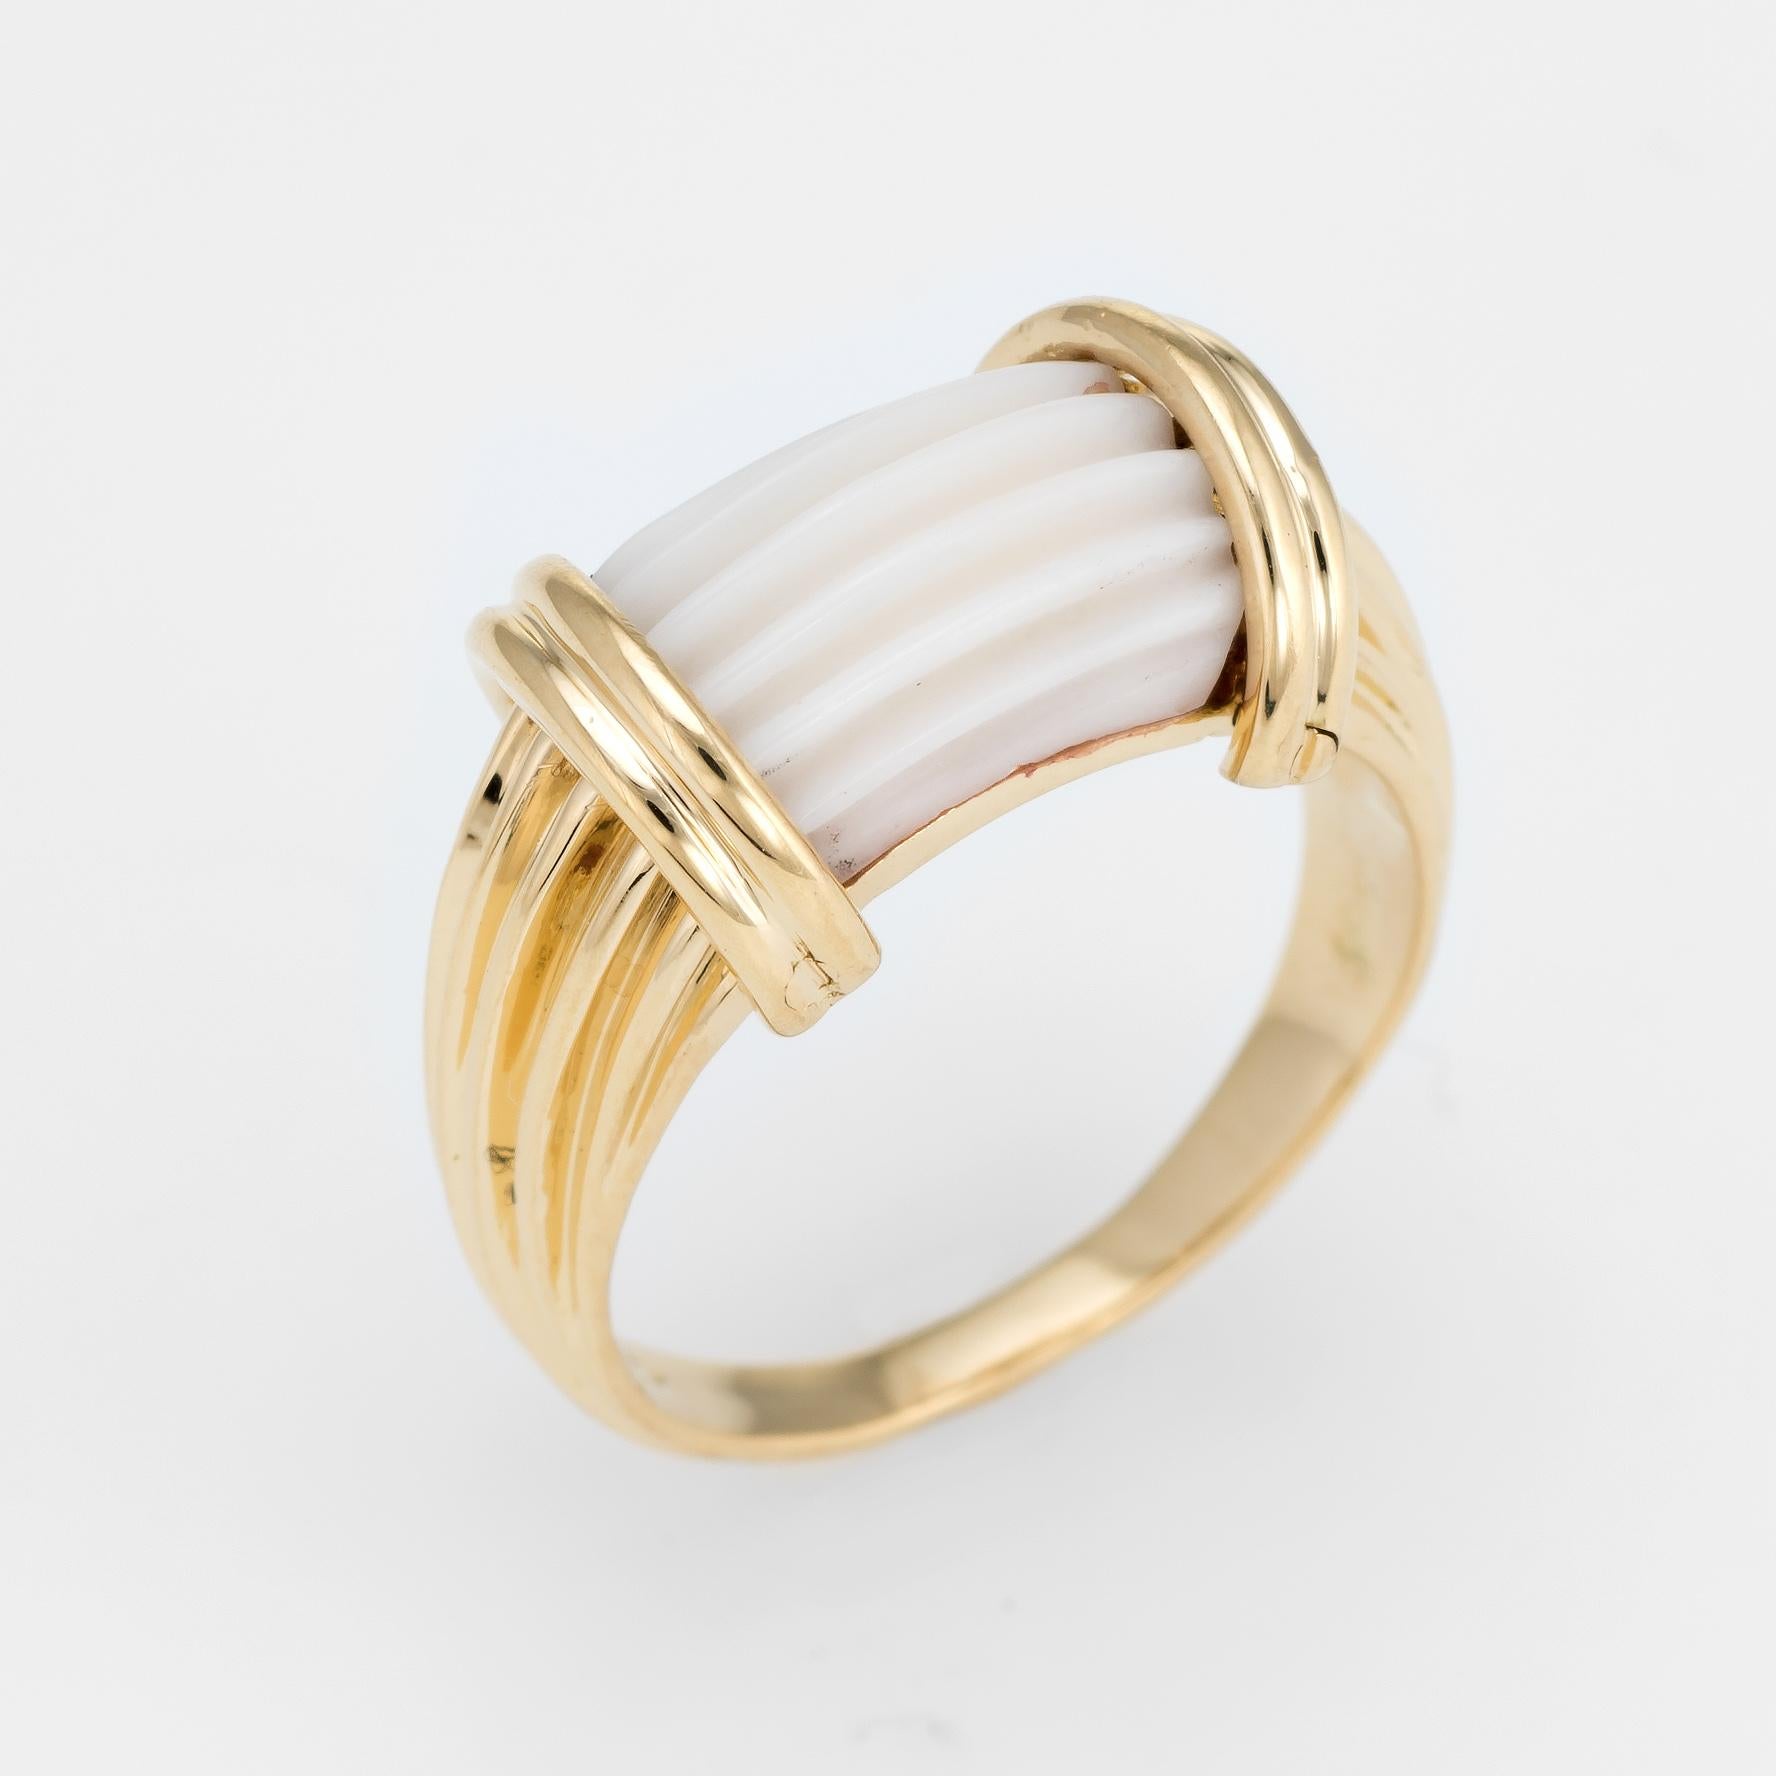 Finely detailed vintage white coral ring (circa 1960s to 1970s), crafted in 14 karat white gold. 

White coral is fluted and set flush into the mount. The coral is in excellent condition and free of cracks or chips.   

The side shoulders feature